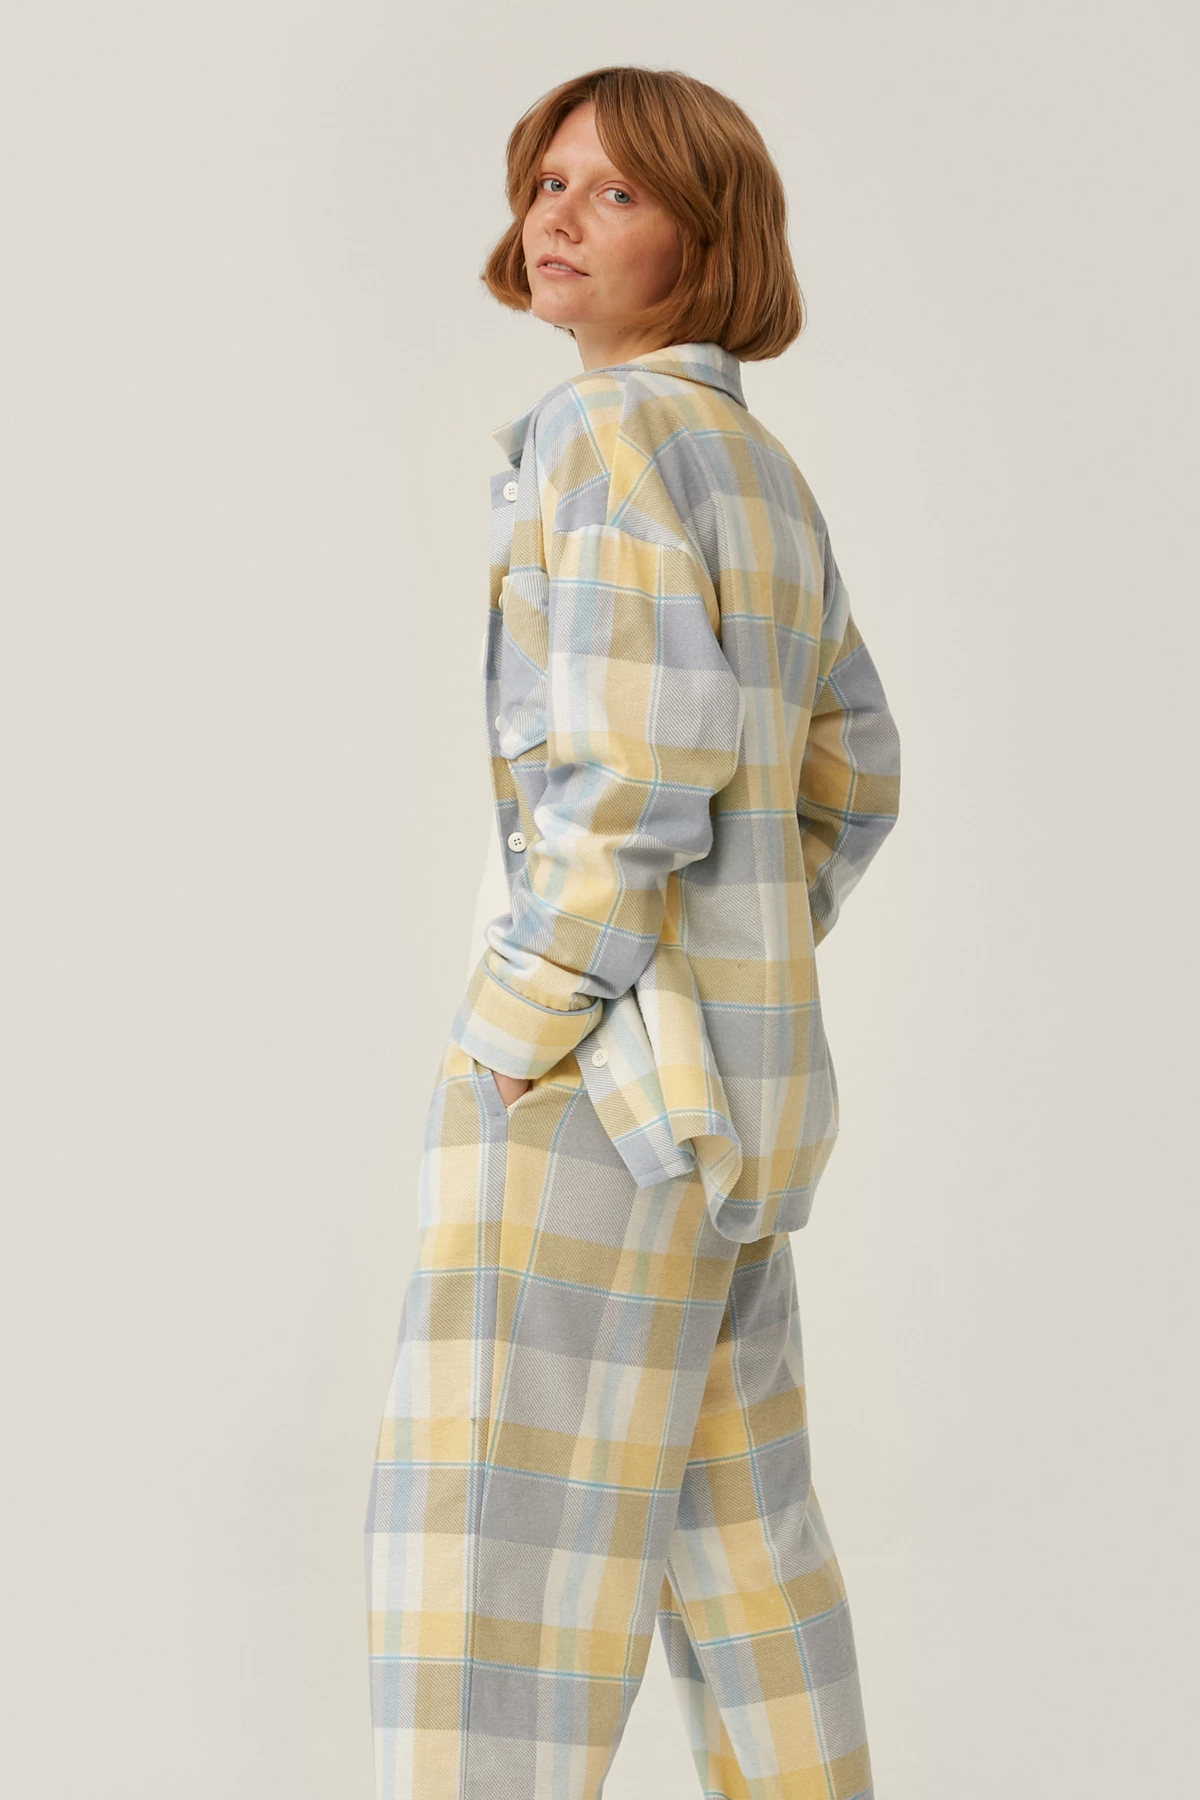 Pajama flanelette shirt in yellow and blue check, photo 2